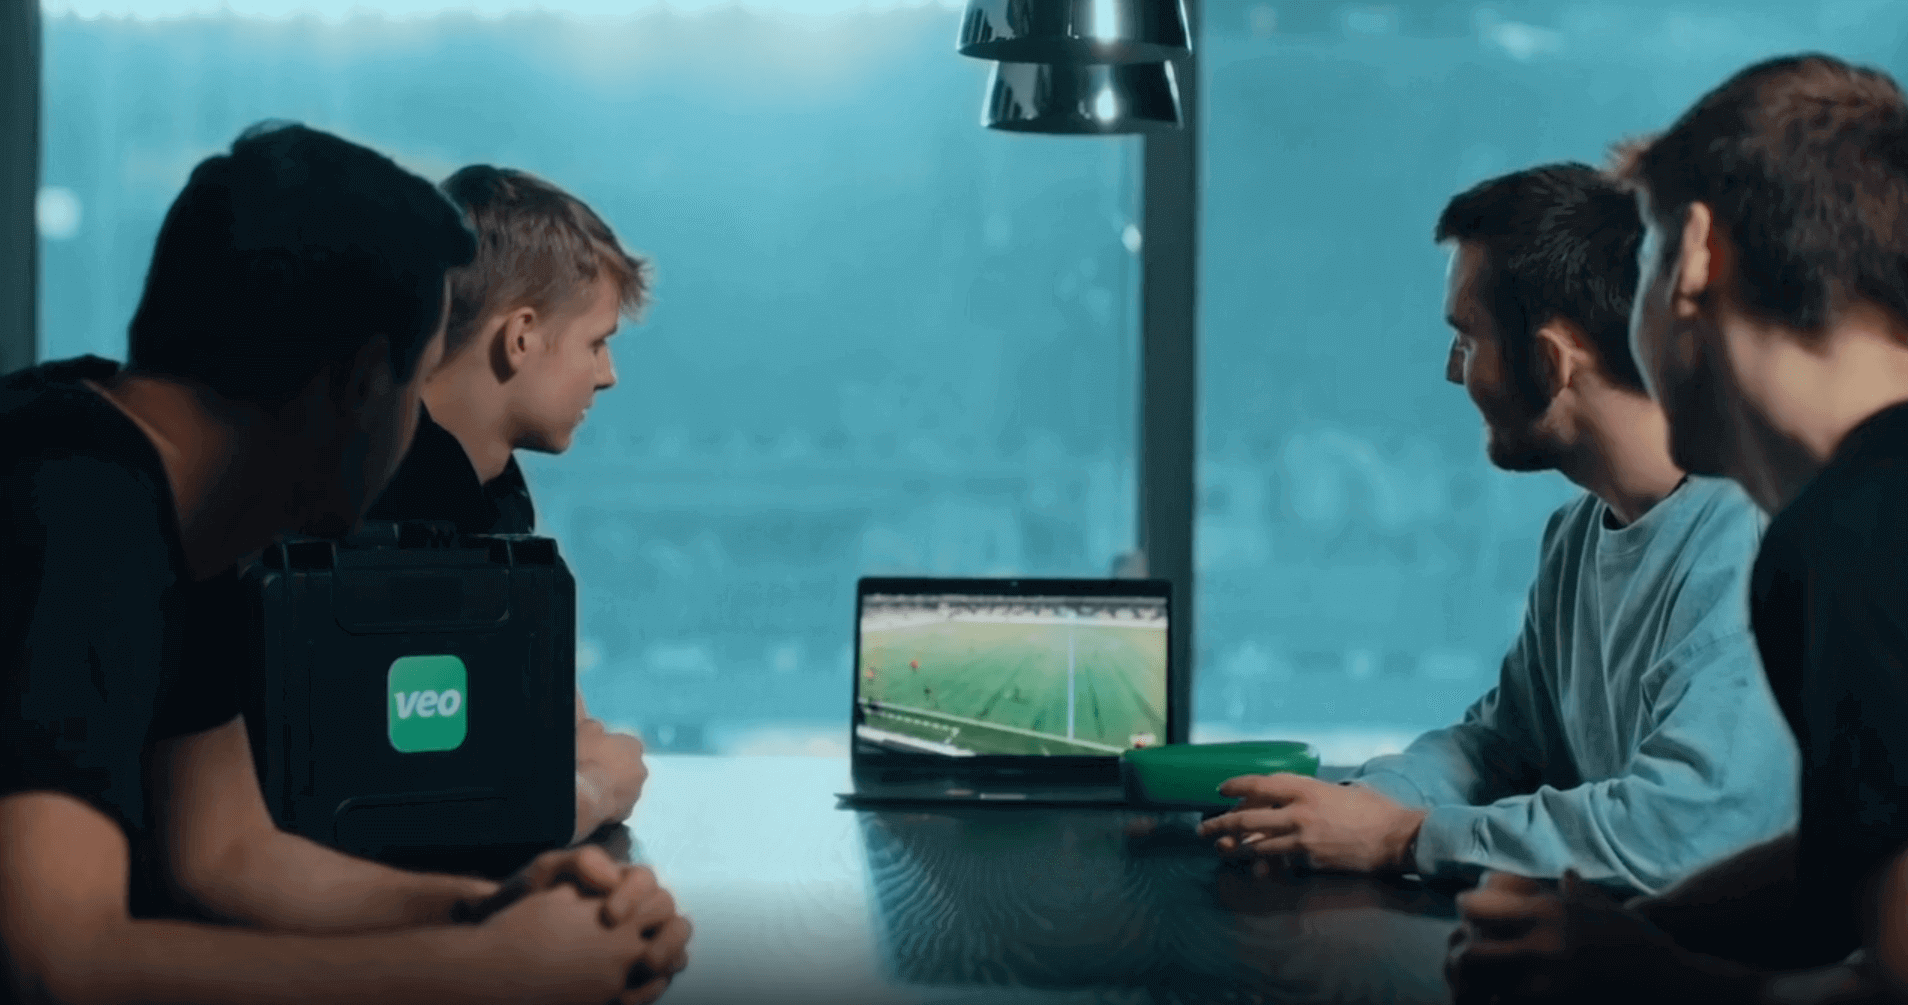 Coach and player analyzing a soccer game with Veo Technologies video analysis platform